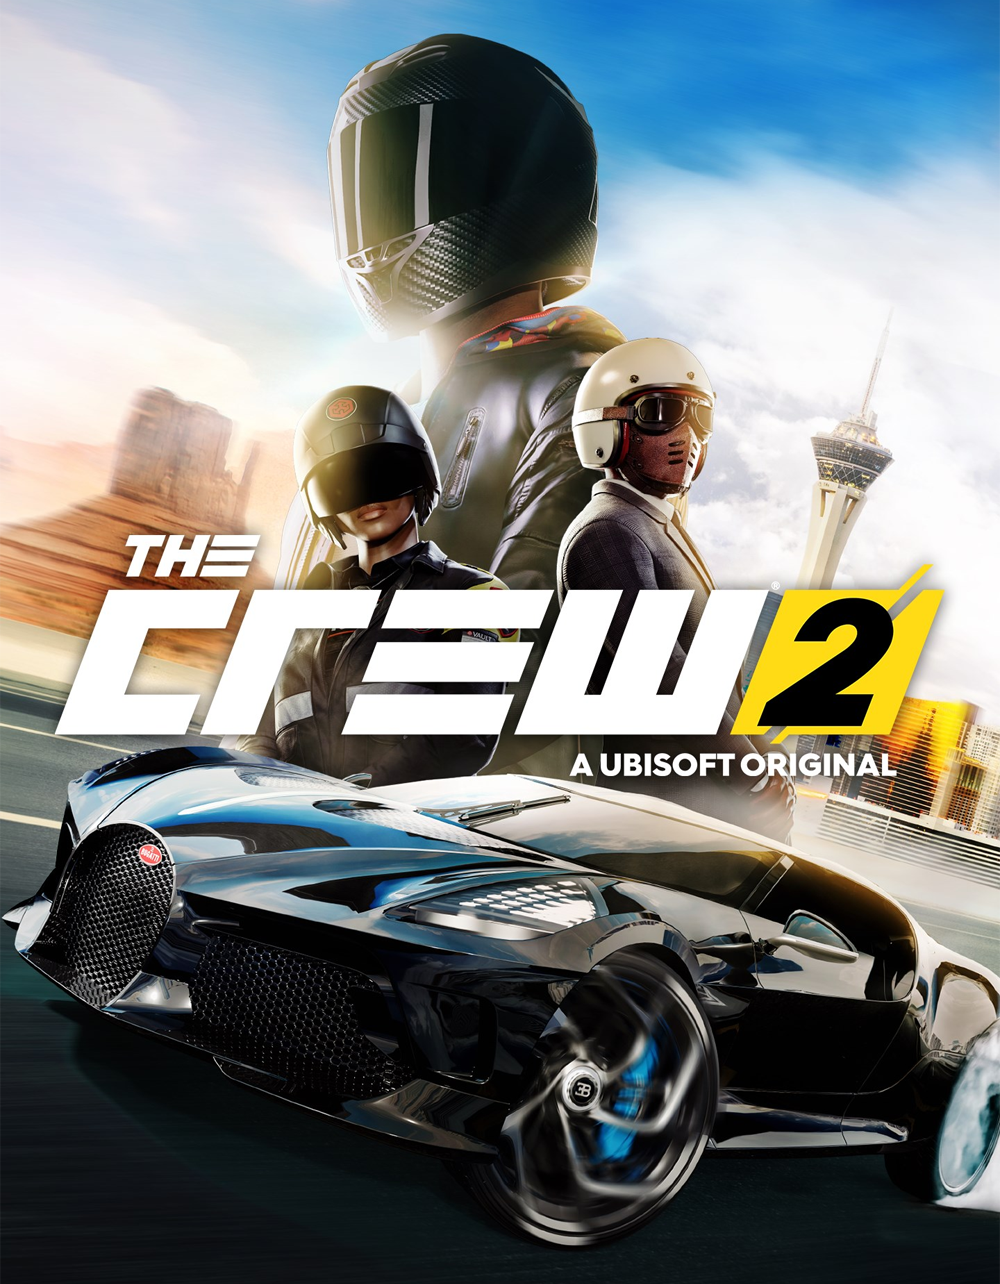 The Crew™ Motorfest | Year 1 Pass - Epic Games Store